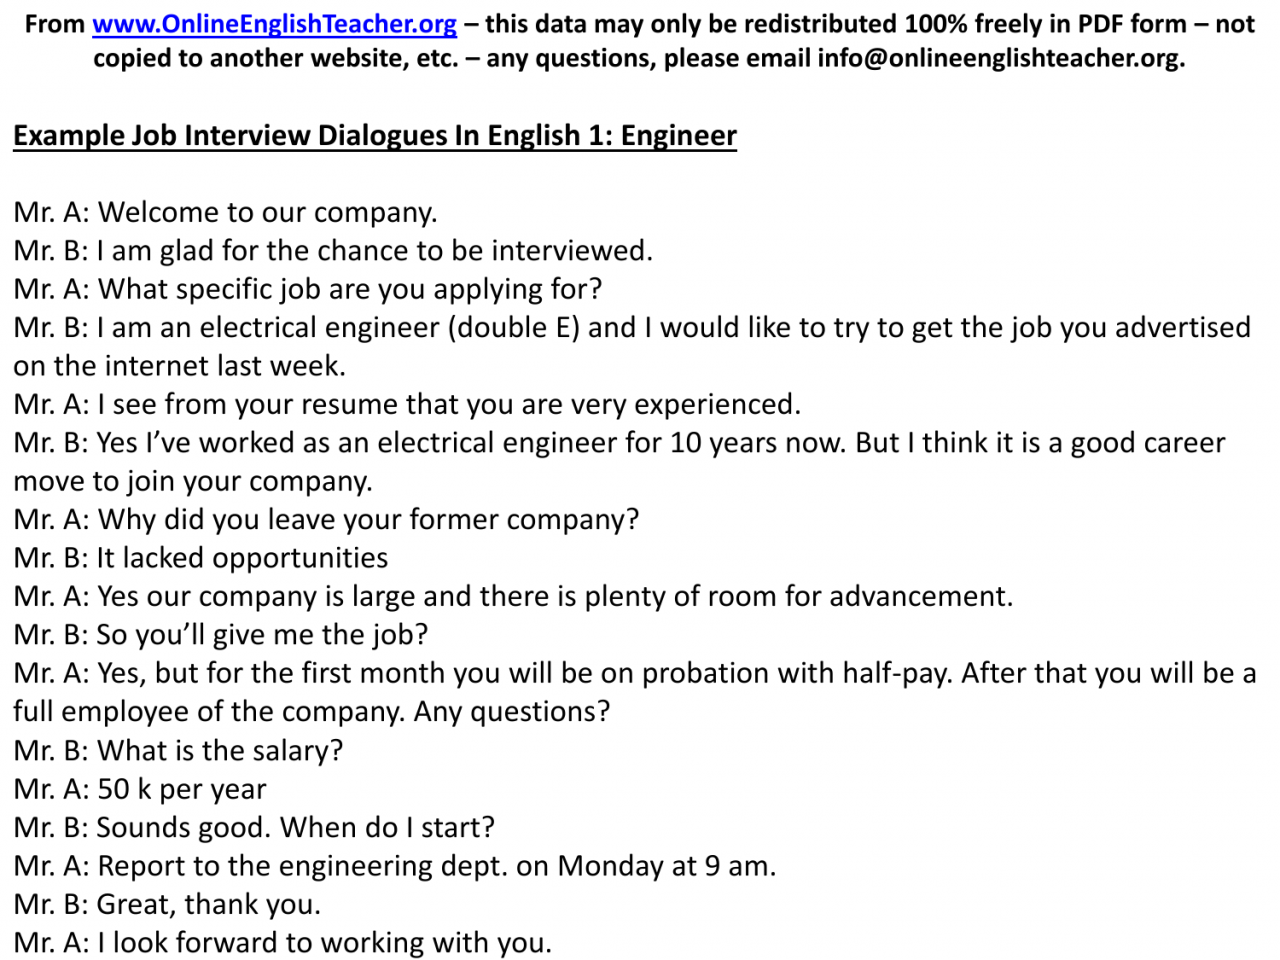 An example of a job interview